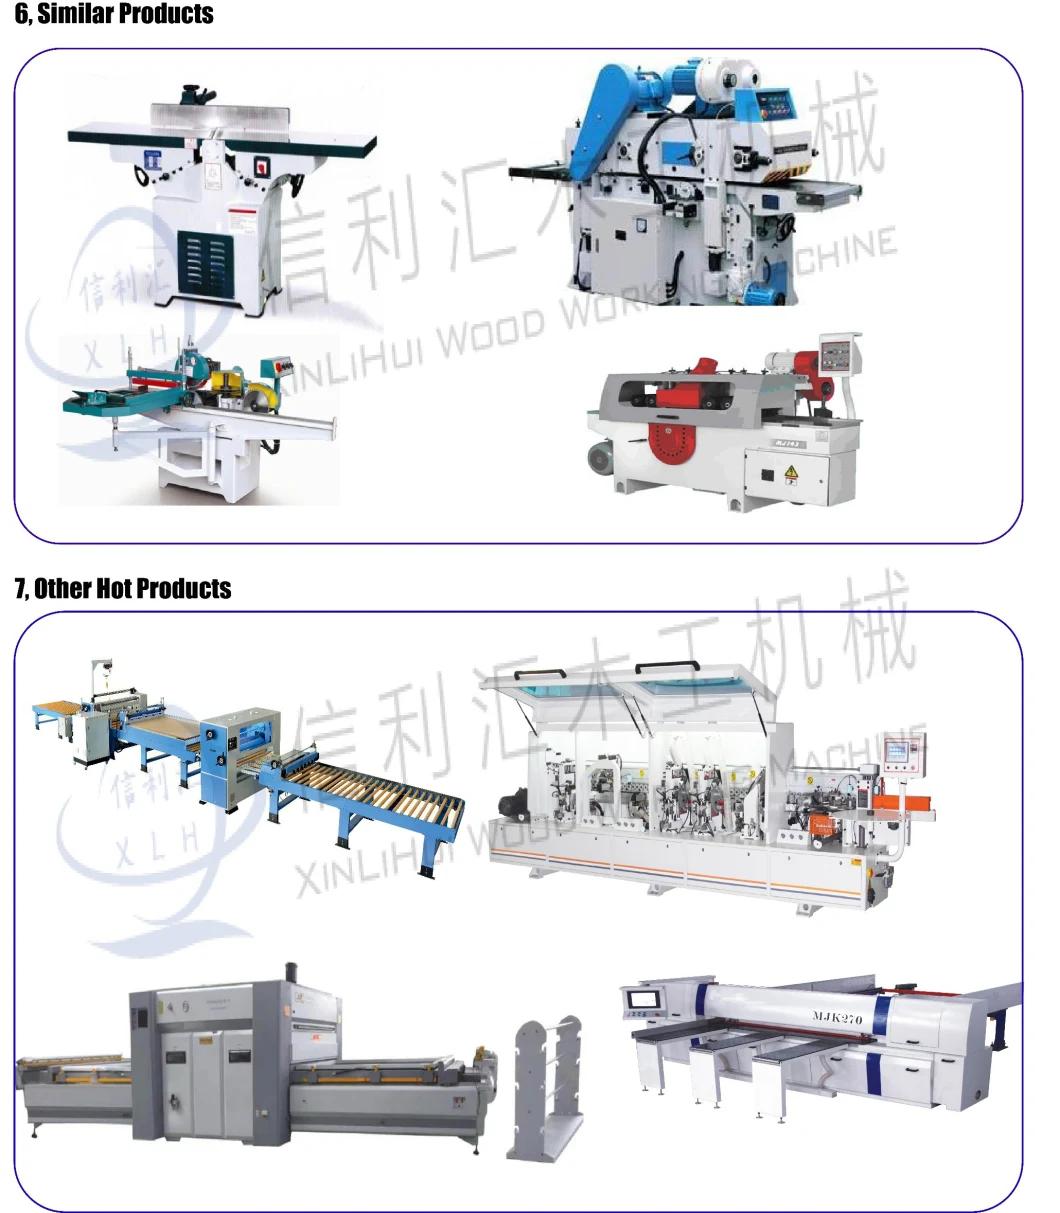 Woodworking Combination Machine with Planer and Thicknessor Sawbench Spindle Moulder / Drill Sander and Mortising Multi Functional Planer / 6 Functions Planer